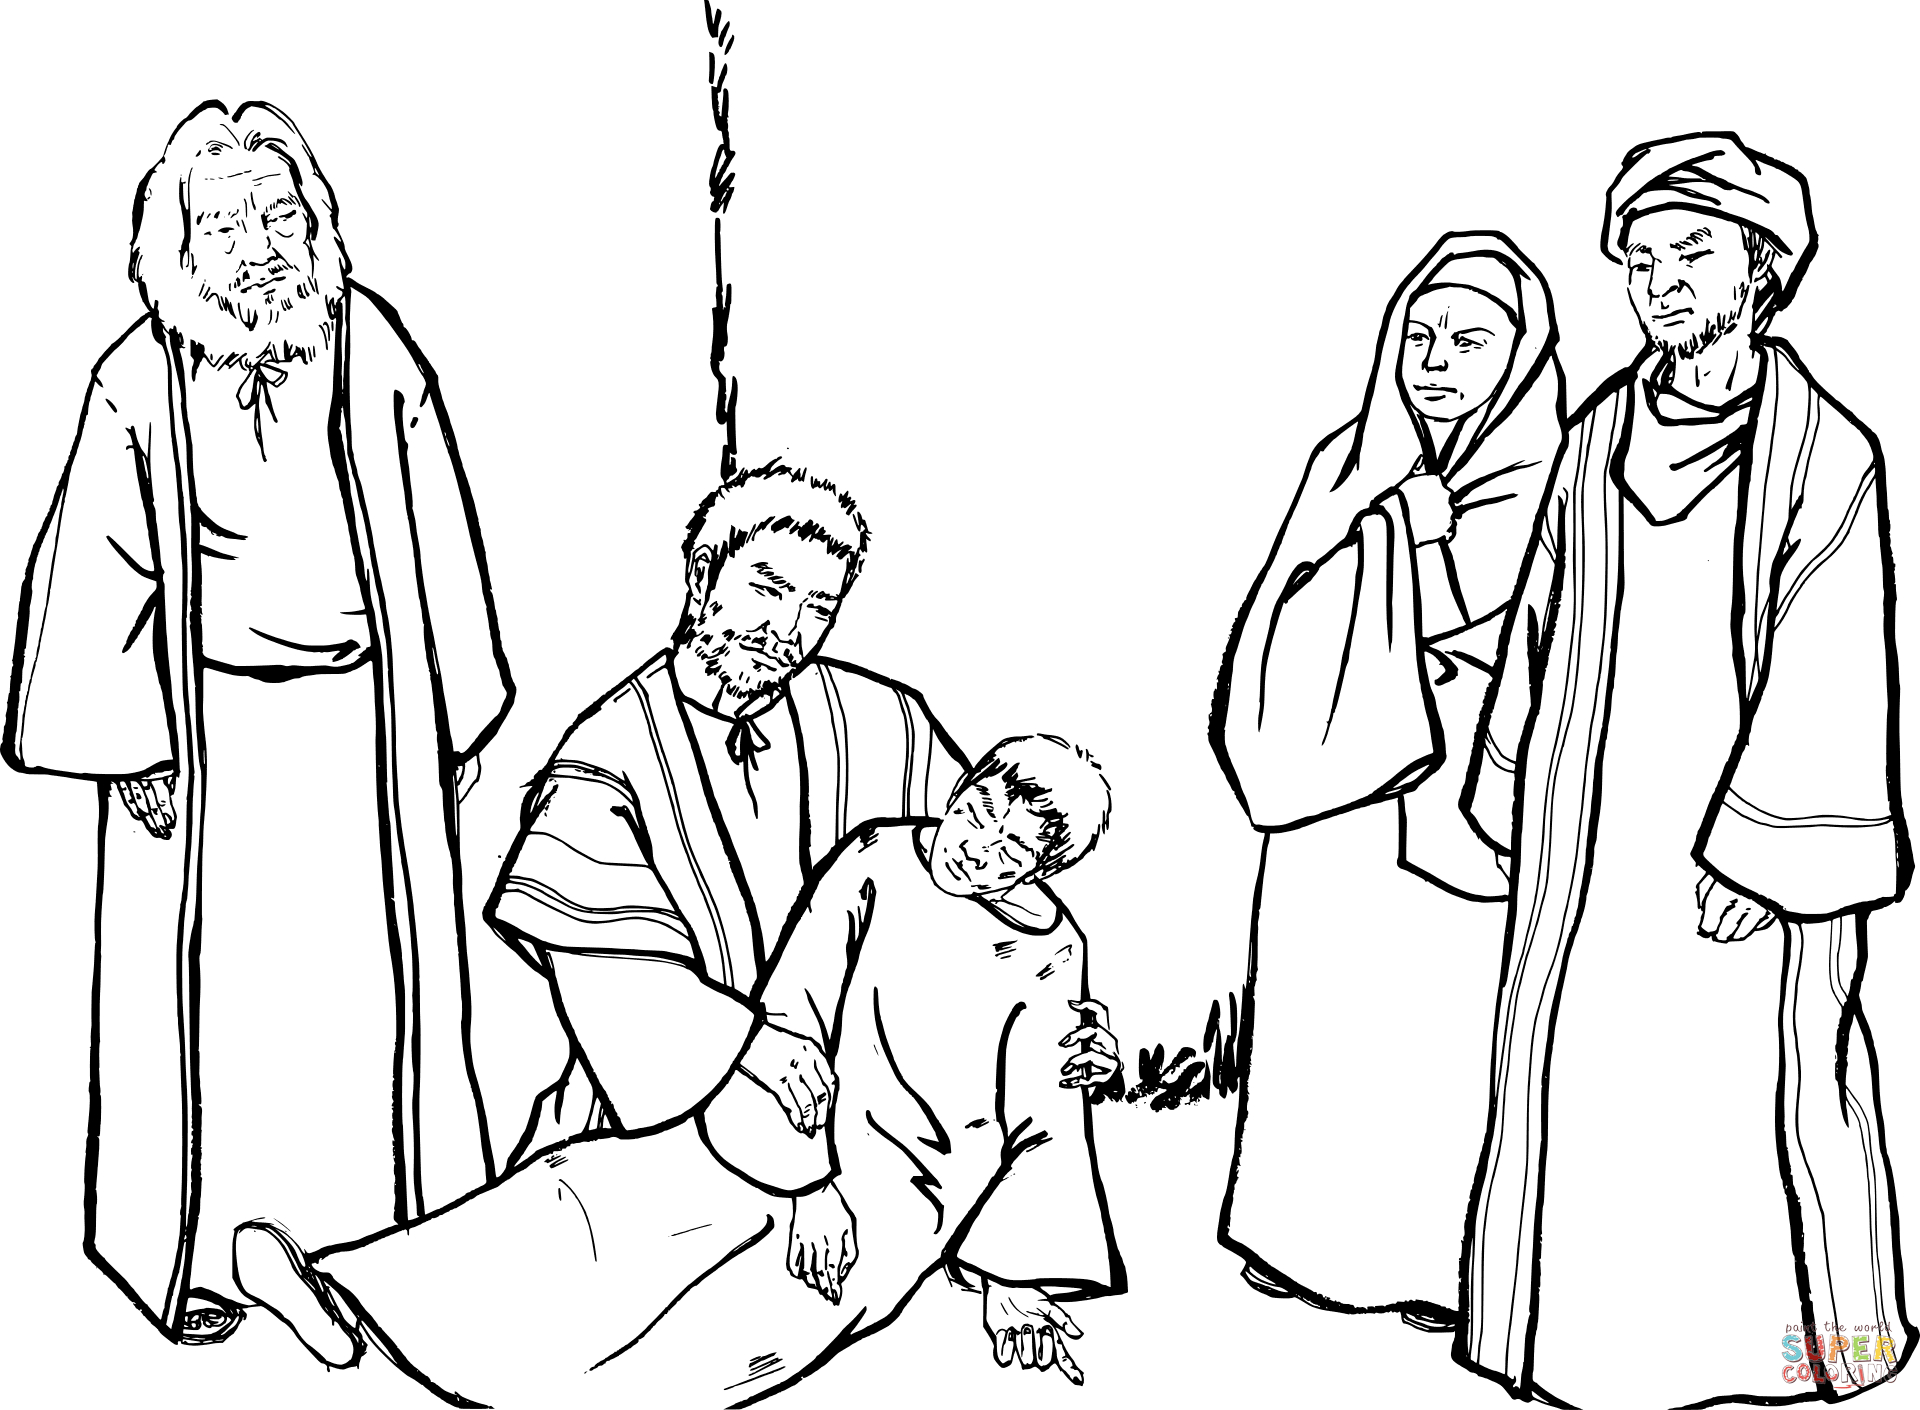 Barnabas Coloring Page Paul Embraces Eutychus Coloring Page Free Printable Coloring Pages